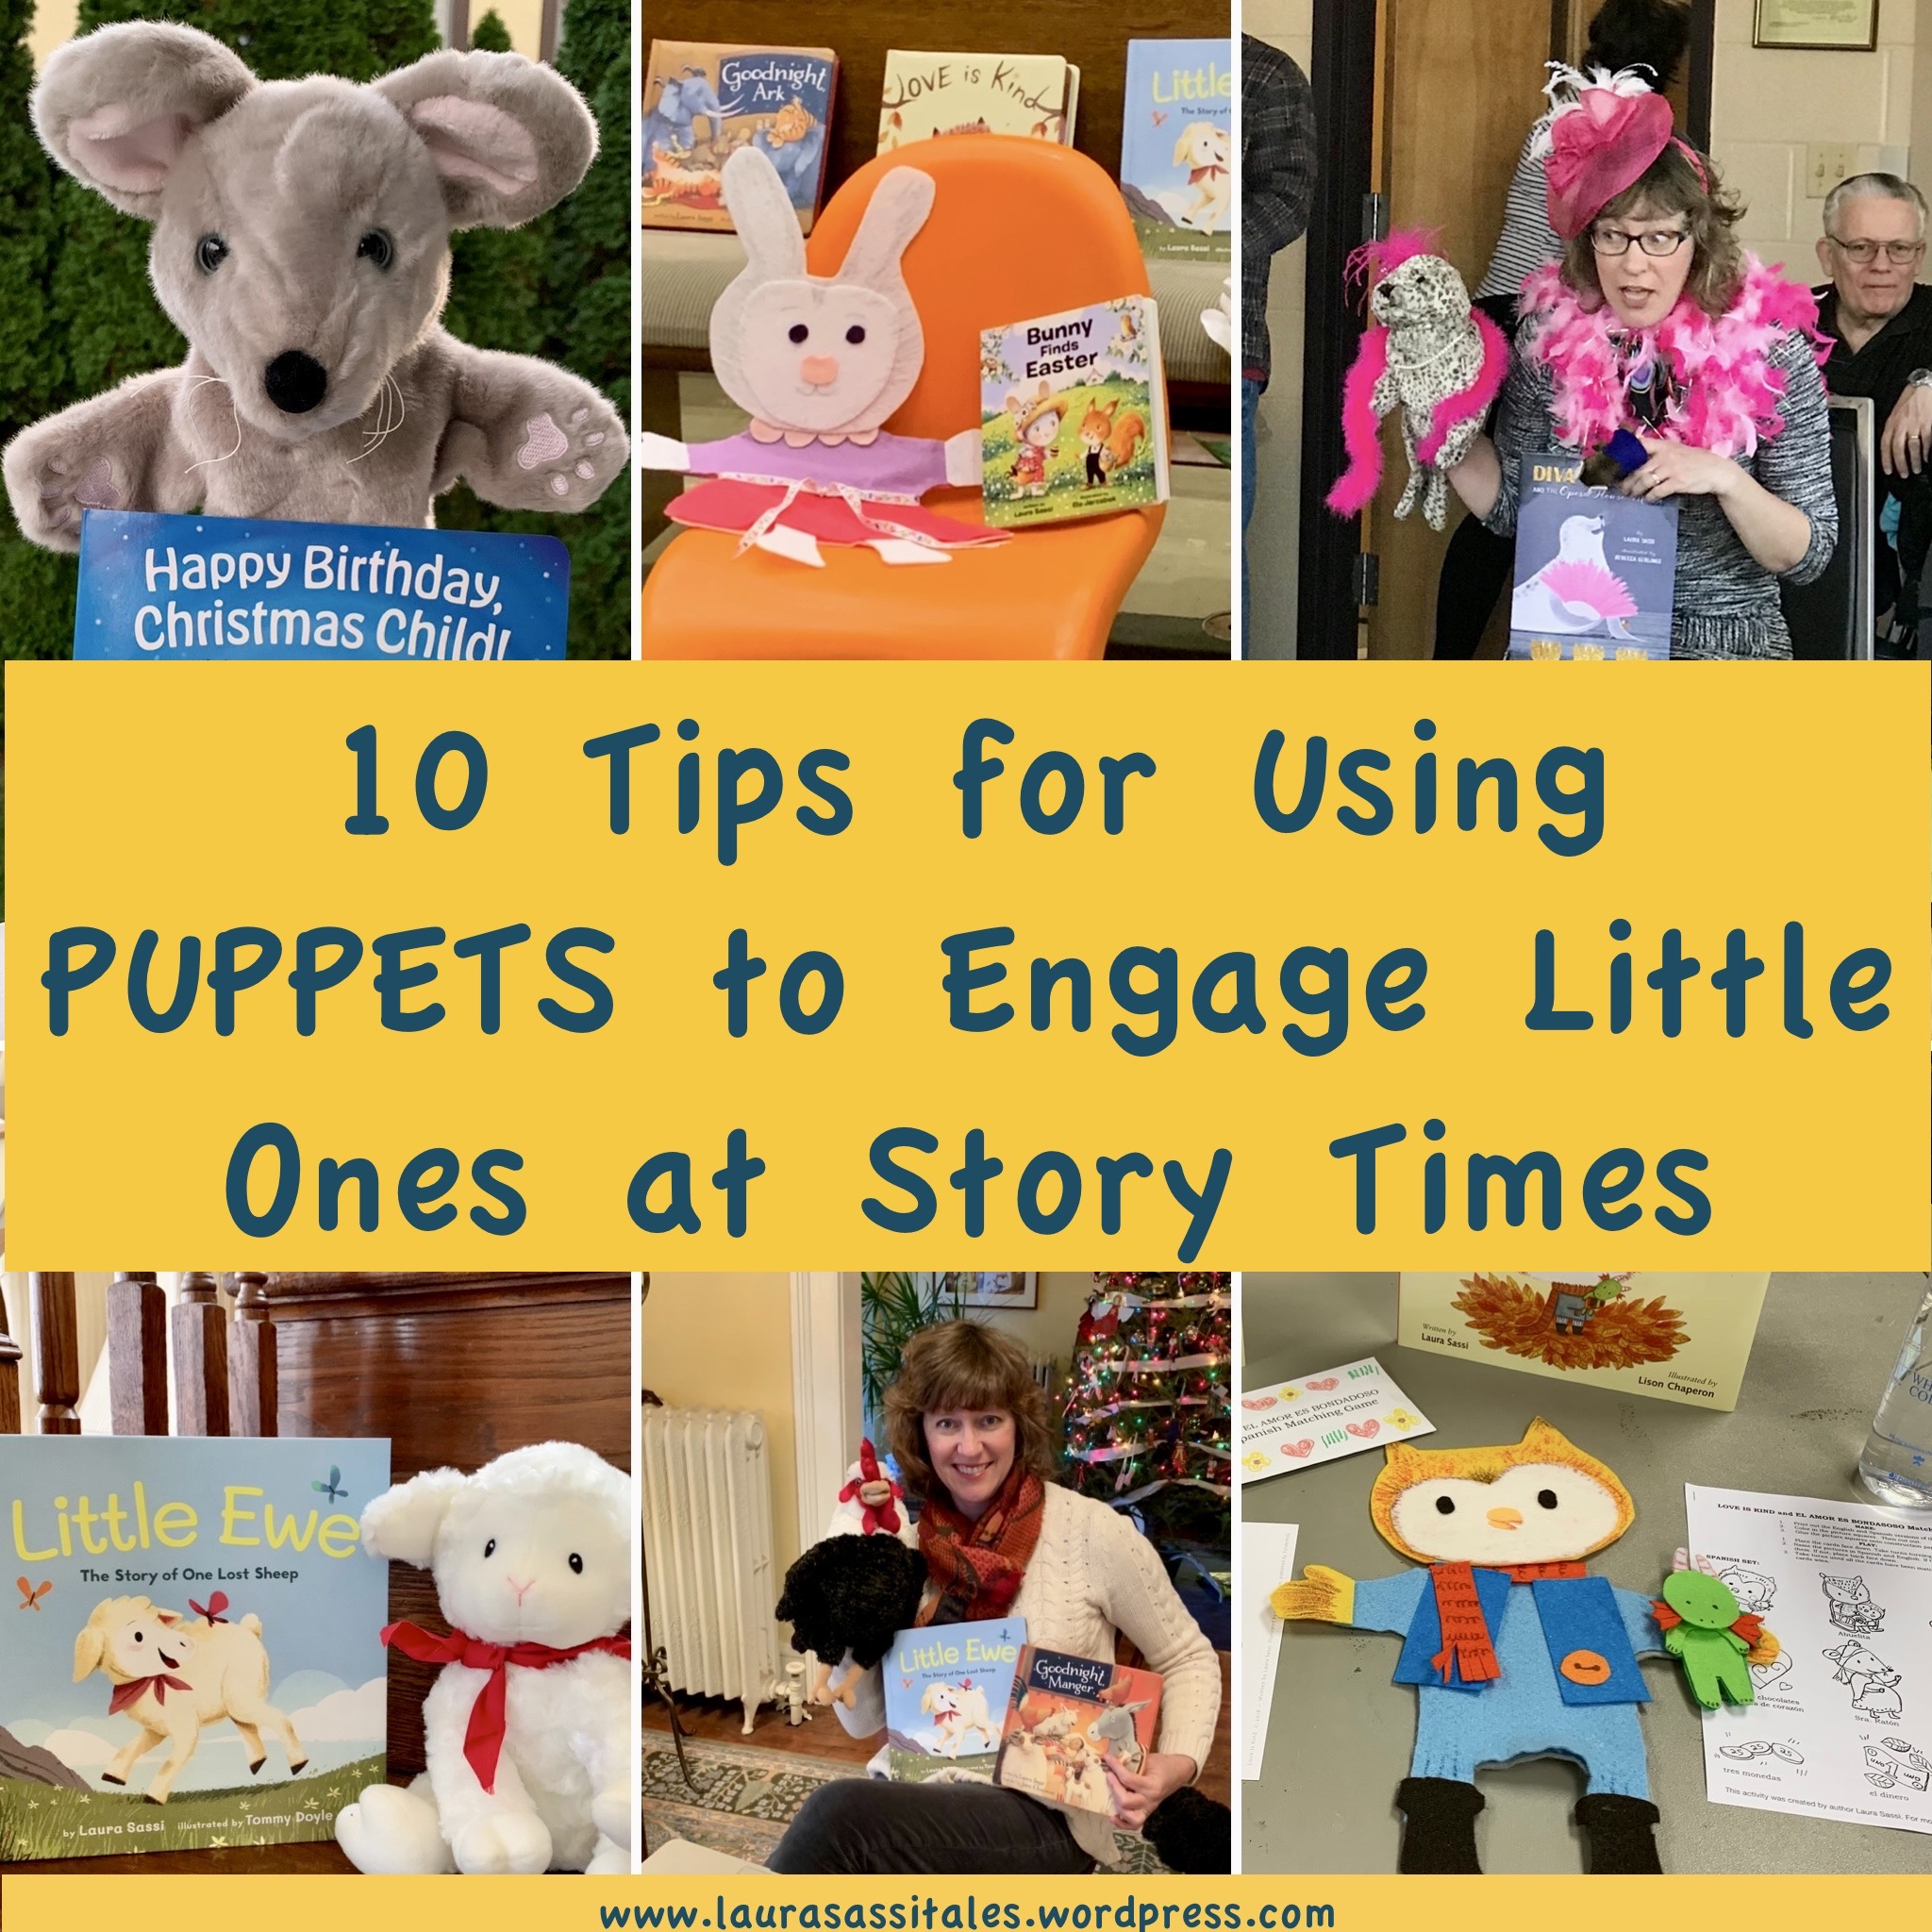 A new school program uses puppets to help students manage their